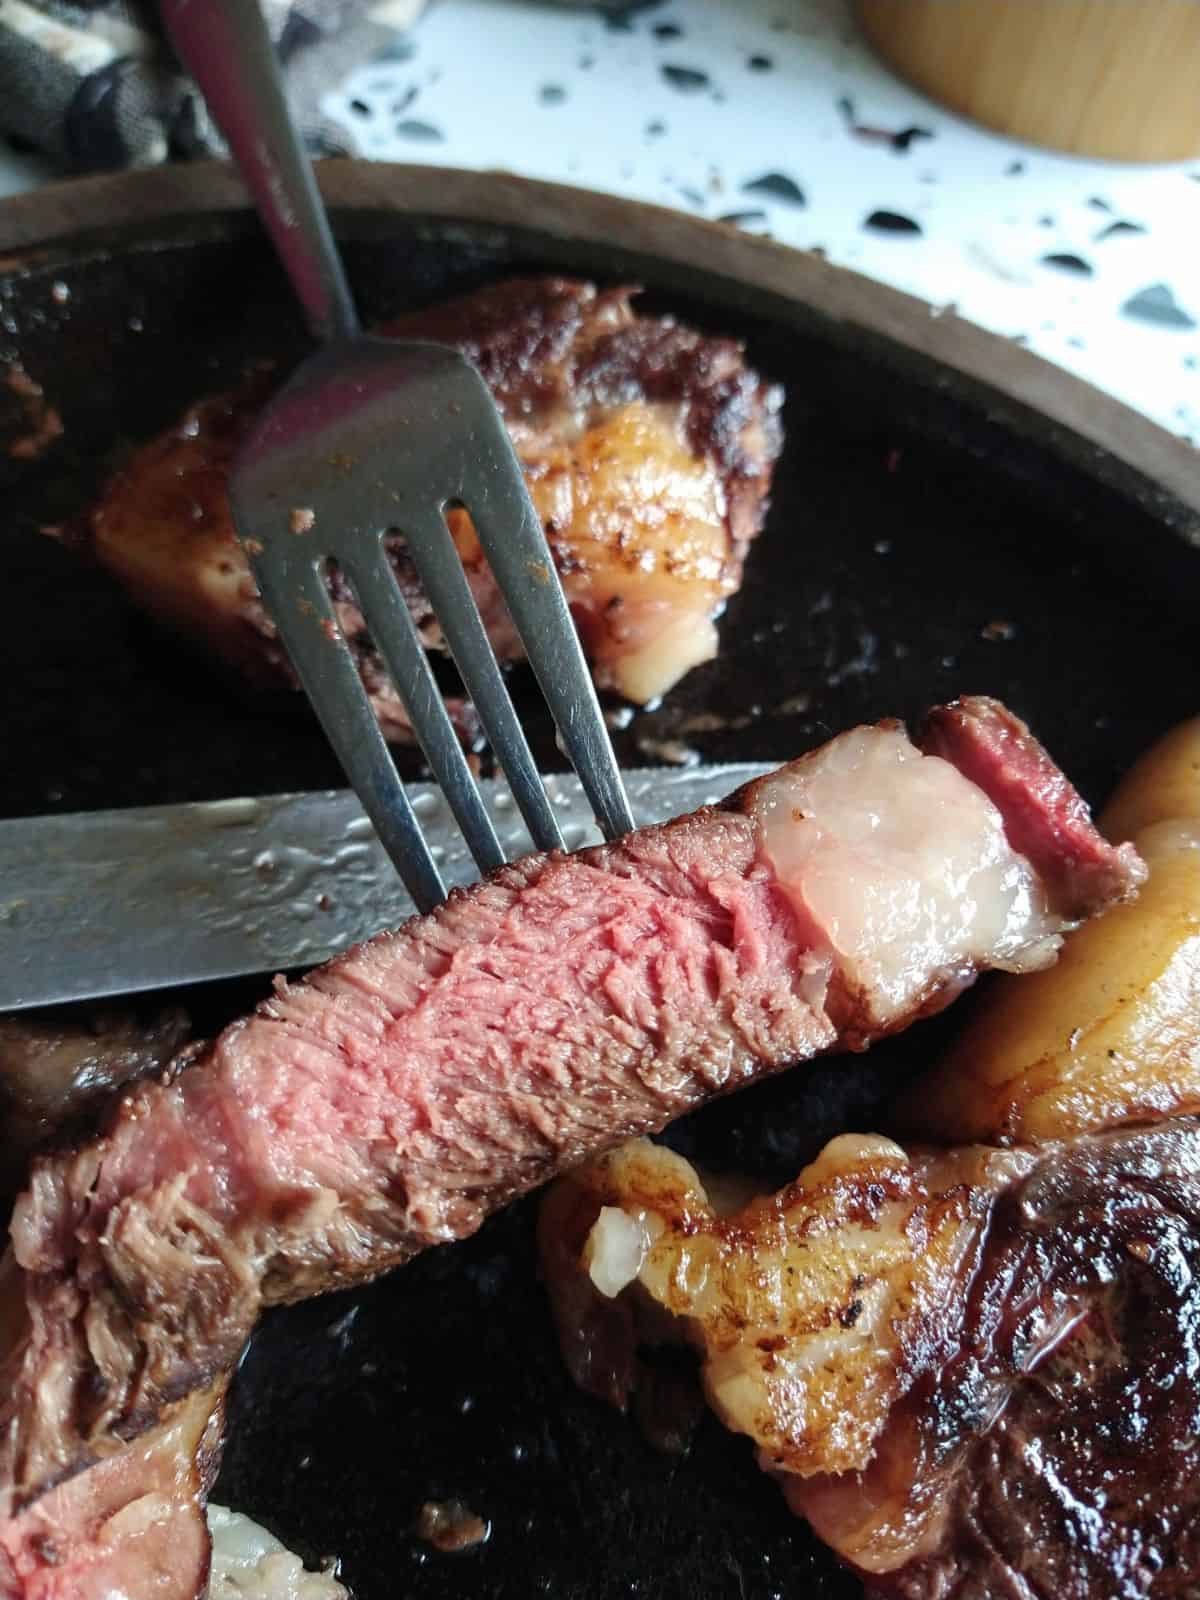 A slice of Bison ribeye cut open to show that it's pink inside. The slice is held with a fork overtop a cast iron skillet.